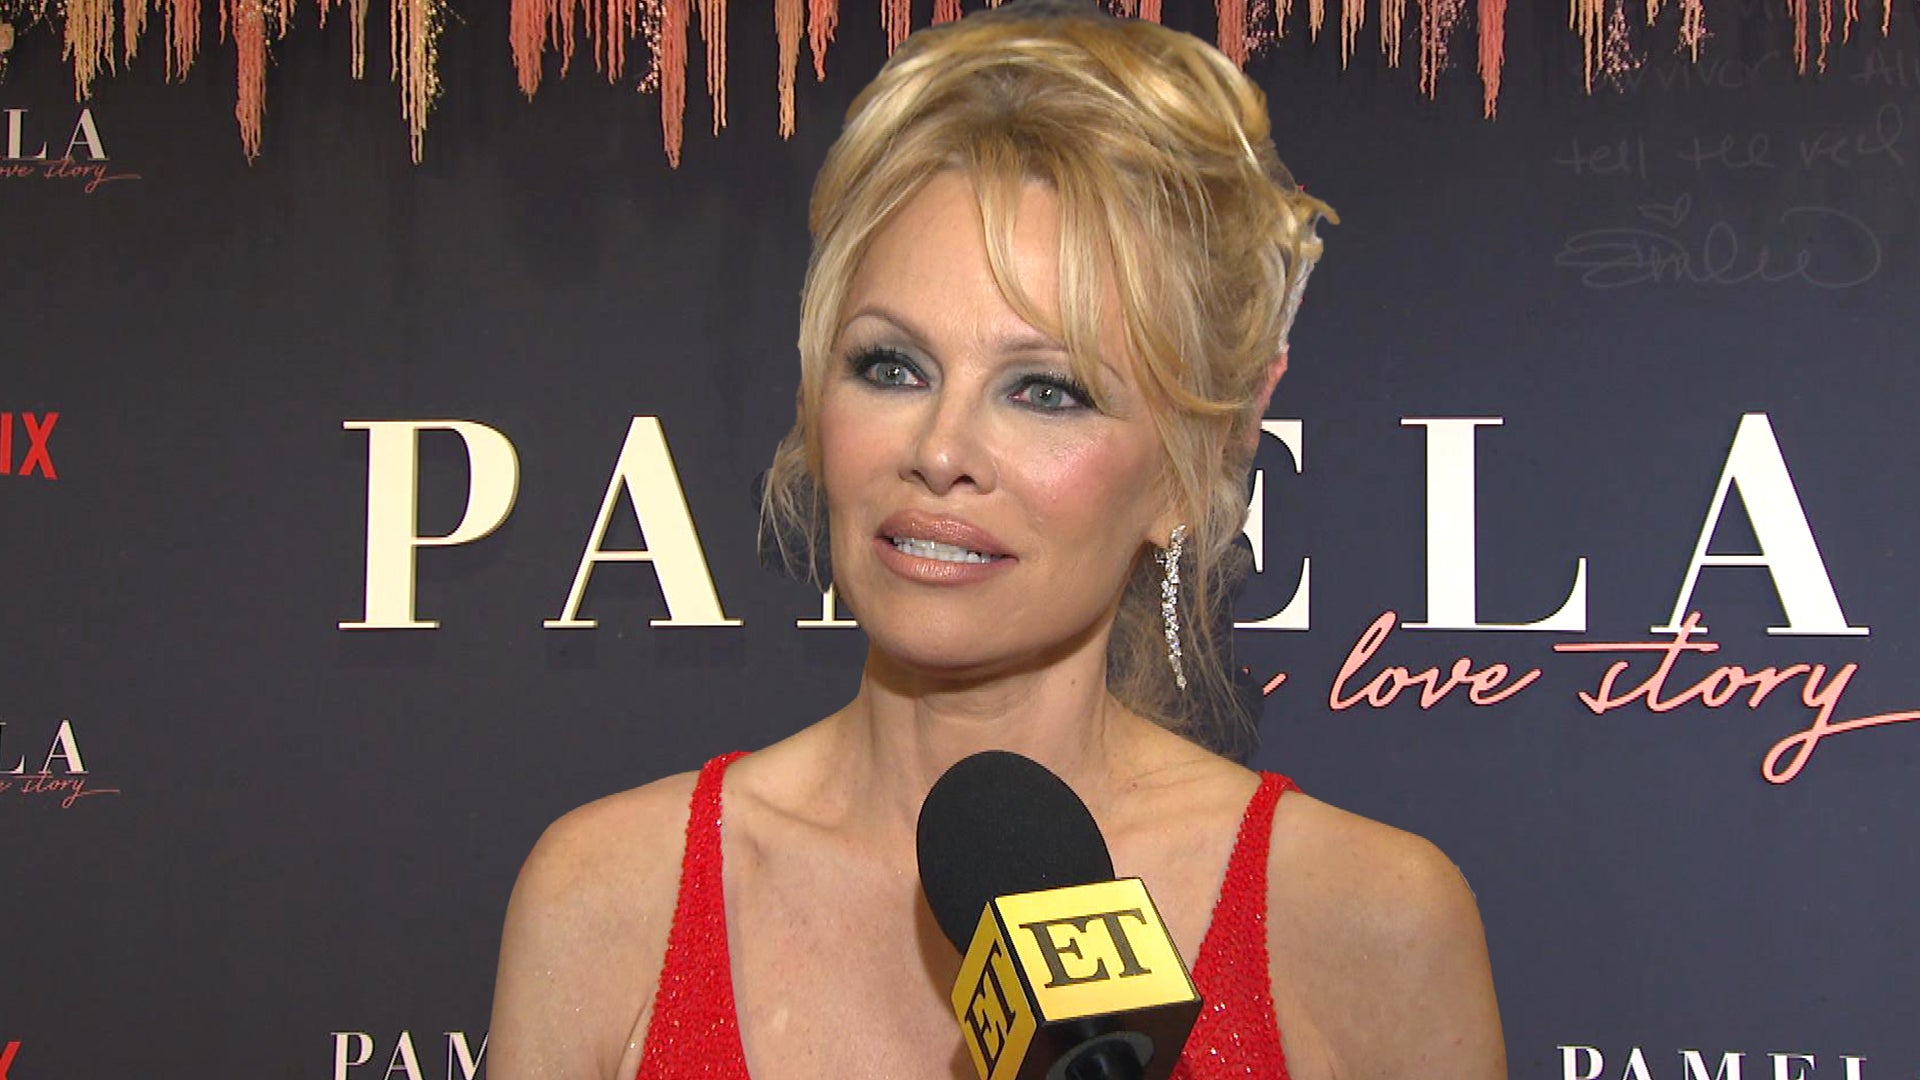 Pamela Anderson Says You Cant Make That Stuff Up in Response to Memoir Allegation (Exclusive) Entertainment Tonight